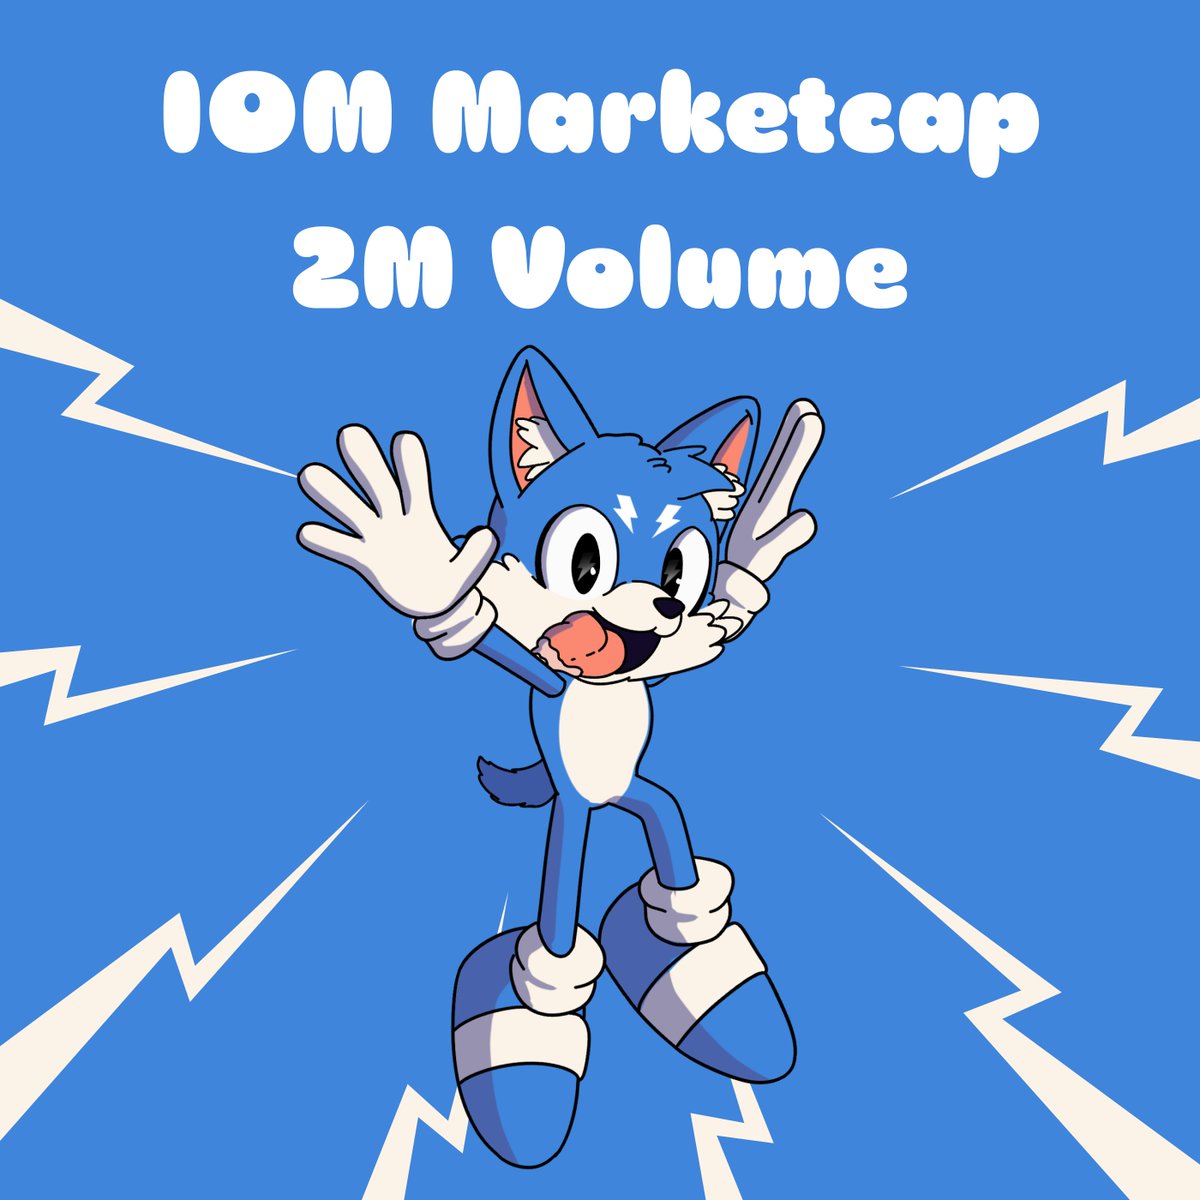 Not even 2 hours in, and $SPEEDY has already breached a $10M market cap and $2M in volume! Speedy is already setting records on the FTM chain... and this is just the beginning! 🐕